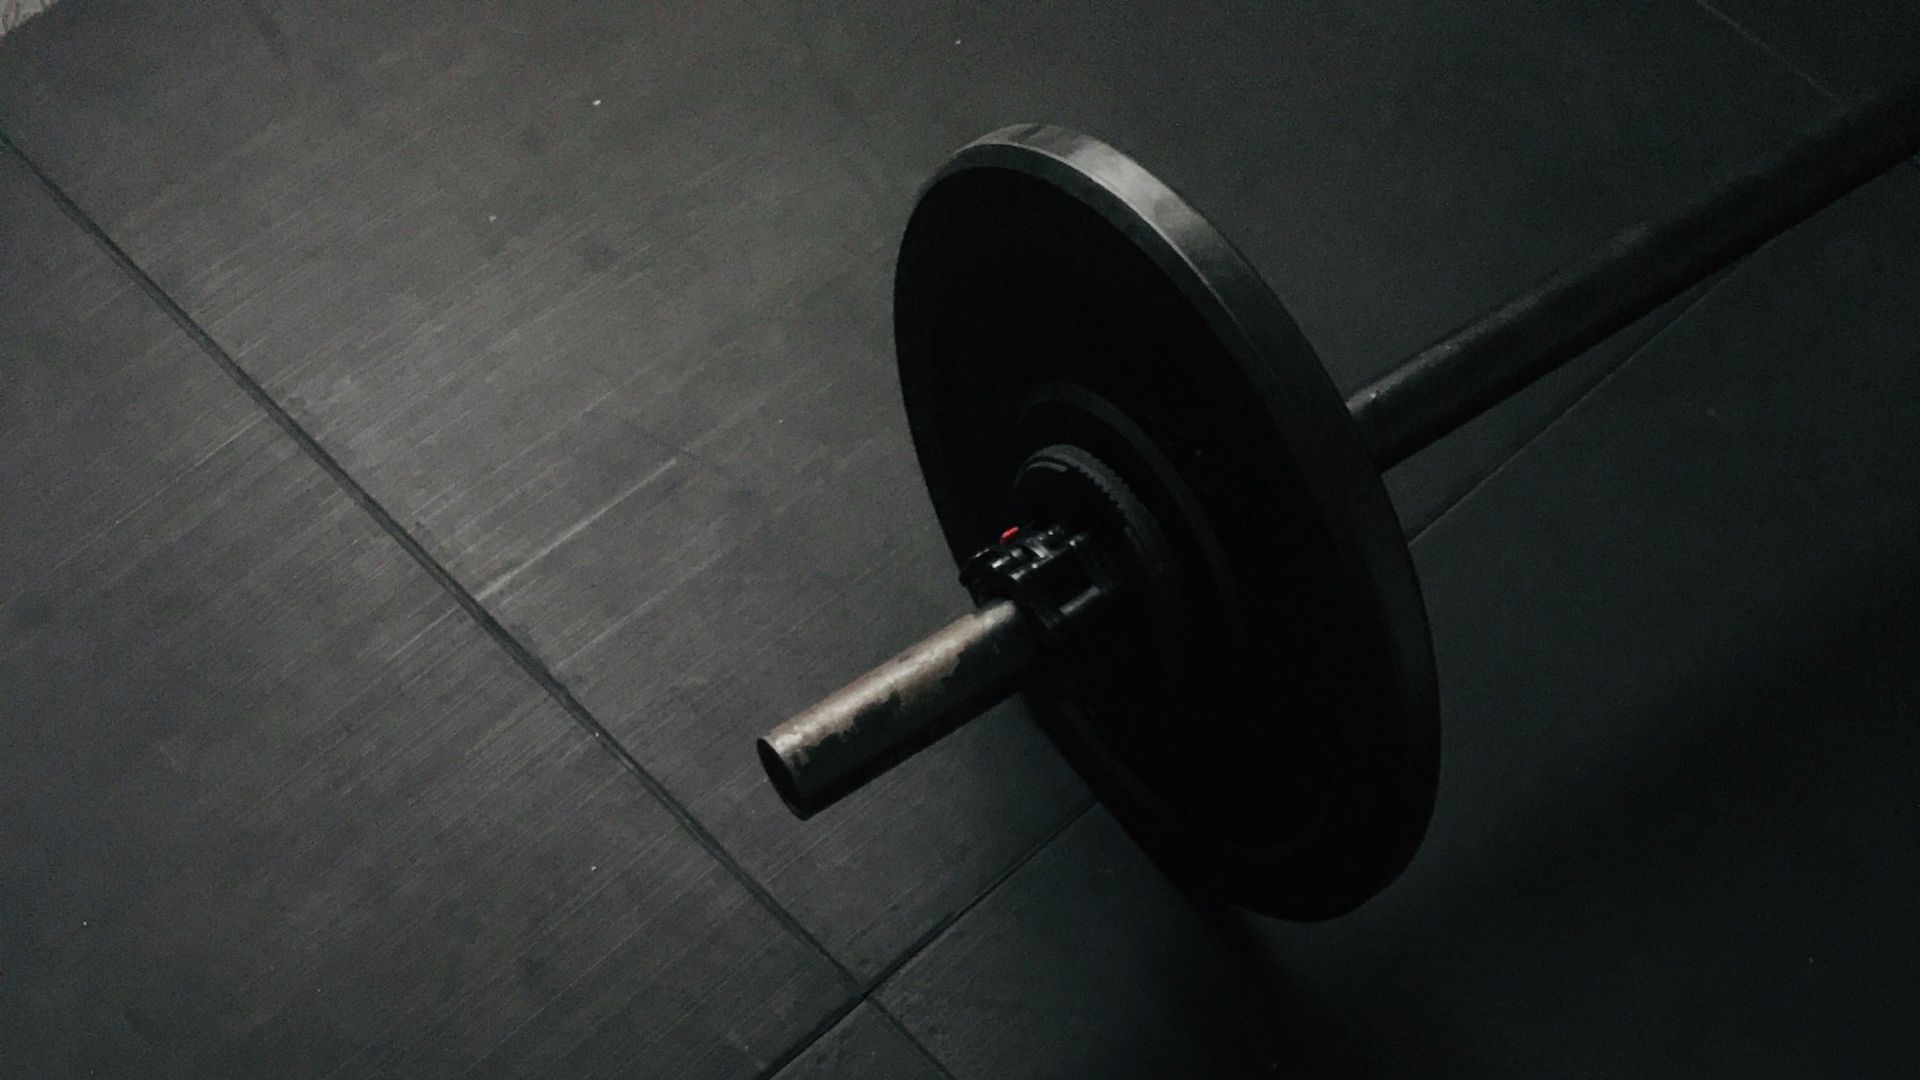 Download wallpaper 1920x1080 ball, barbell, crossfit, bodybuilding, gym  full hd, hdtv, fhd, 1080p hd background